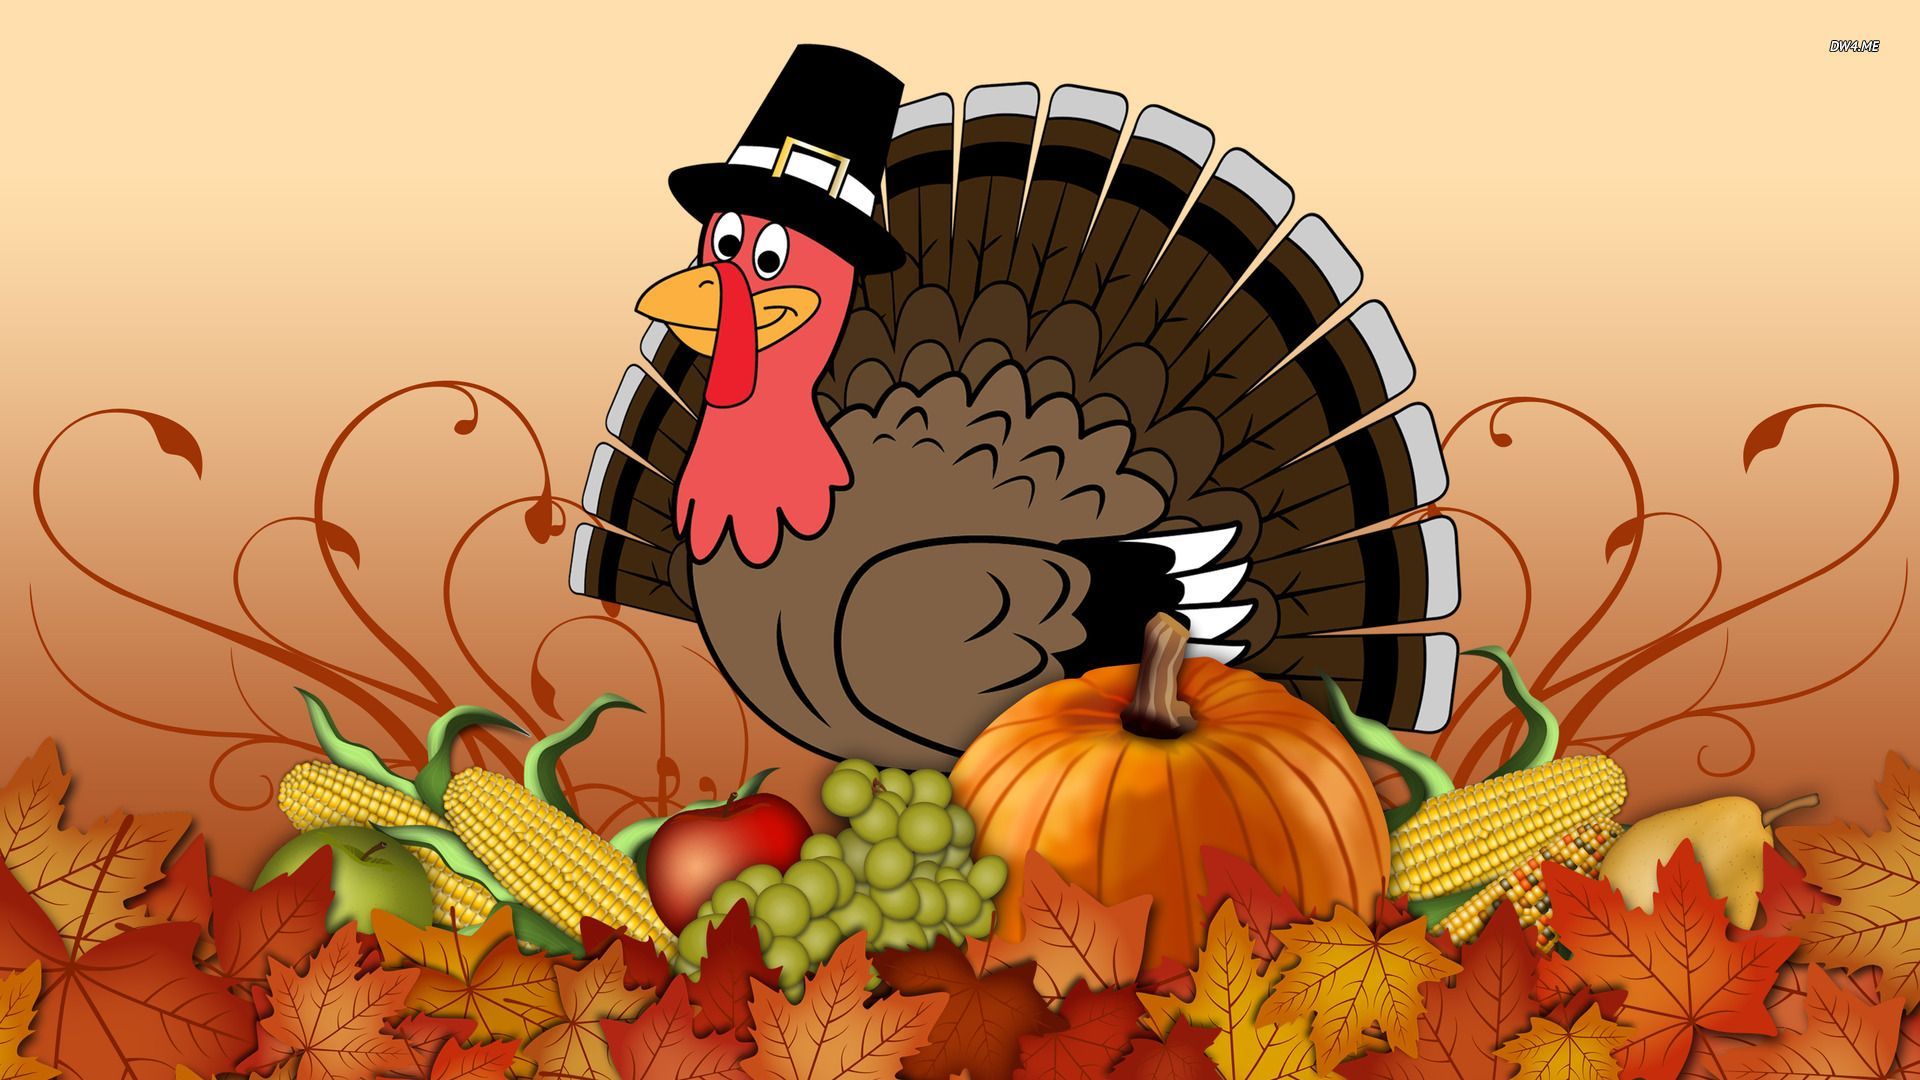 Free Thanksgiving Background Wallpaper For Desktop. Happy thanksgiving wallpaper, Thanksgiving wishes, Free thanksgiving wallpaper